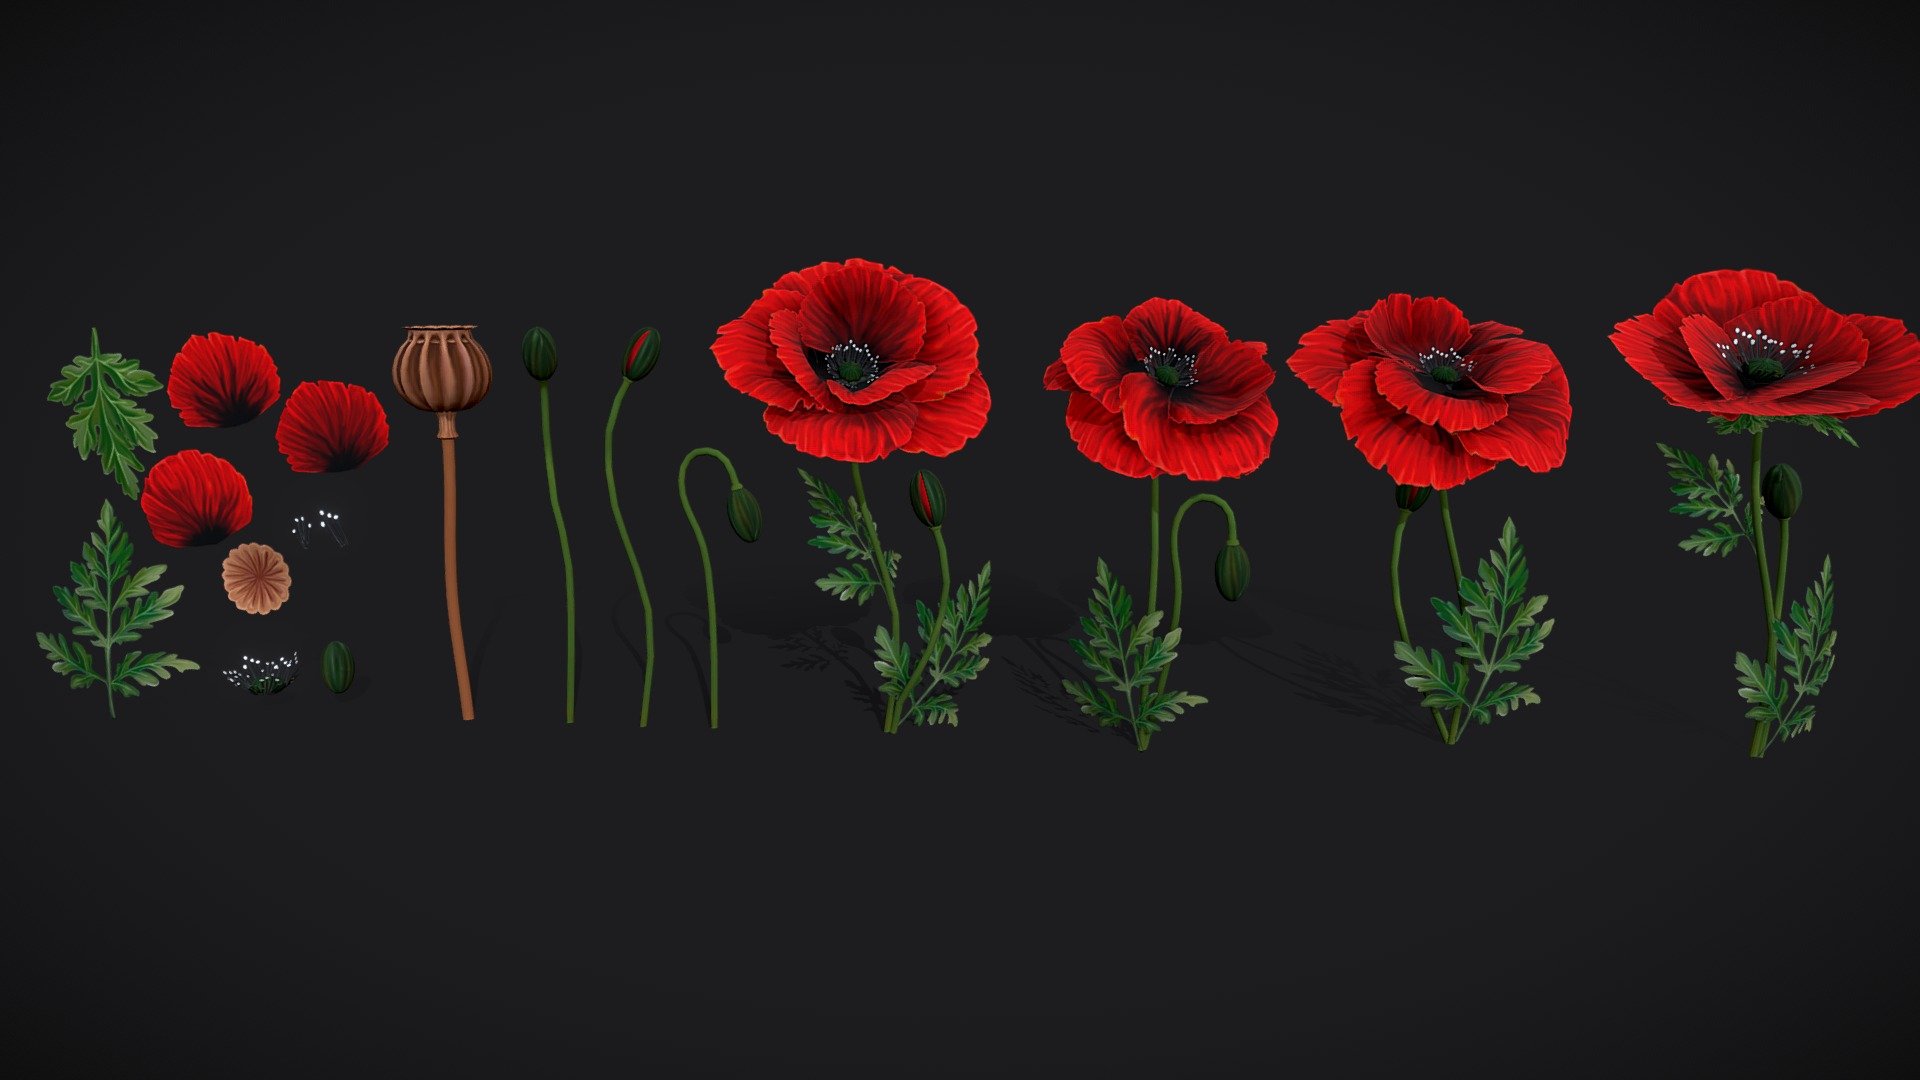 Poppies handpainted model. Overlapping UVs (texture atlas)

The archive contains following files:




.MA file (original MAYA file, version 2022)

FBX file

OBJ

Texture set:




Poppy_BaseColor (1024 * 1024 and 4096 * 4096 )

Poppy_Opacity (1024 * 1024 and 4096 * 4096 )

If you have any additional questions or any problems related to the model, kindly contact me 3d model